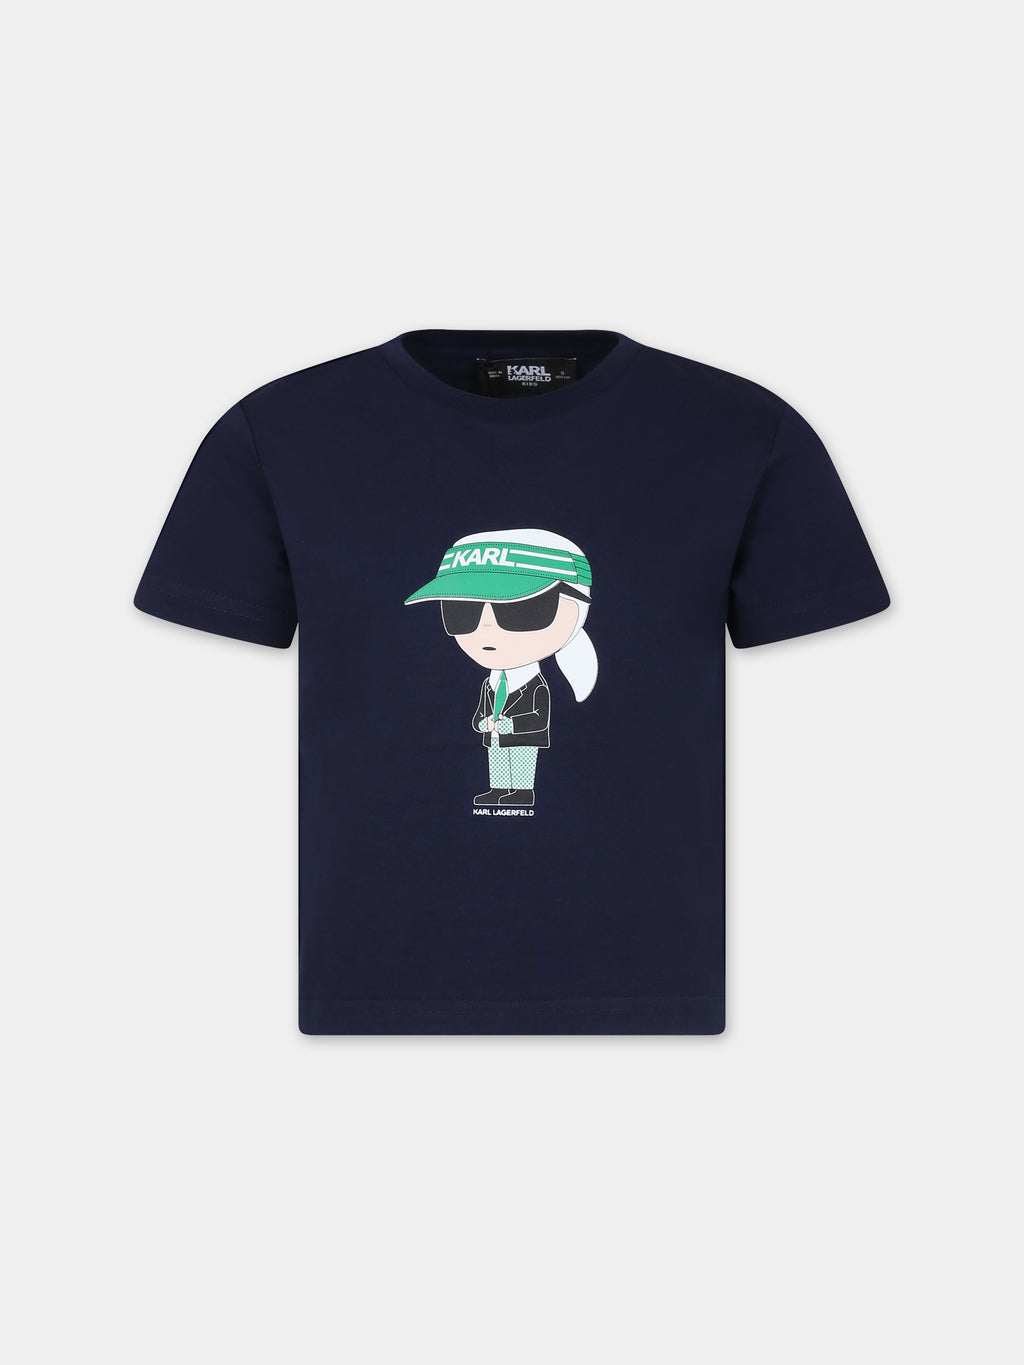 Blue t-shirt for kids with Karl